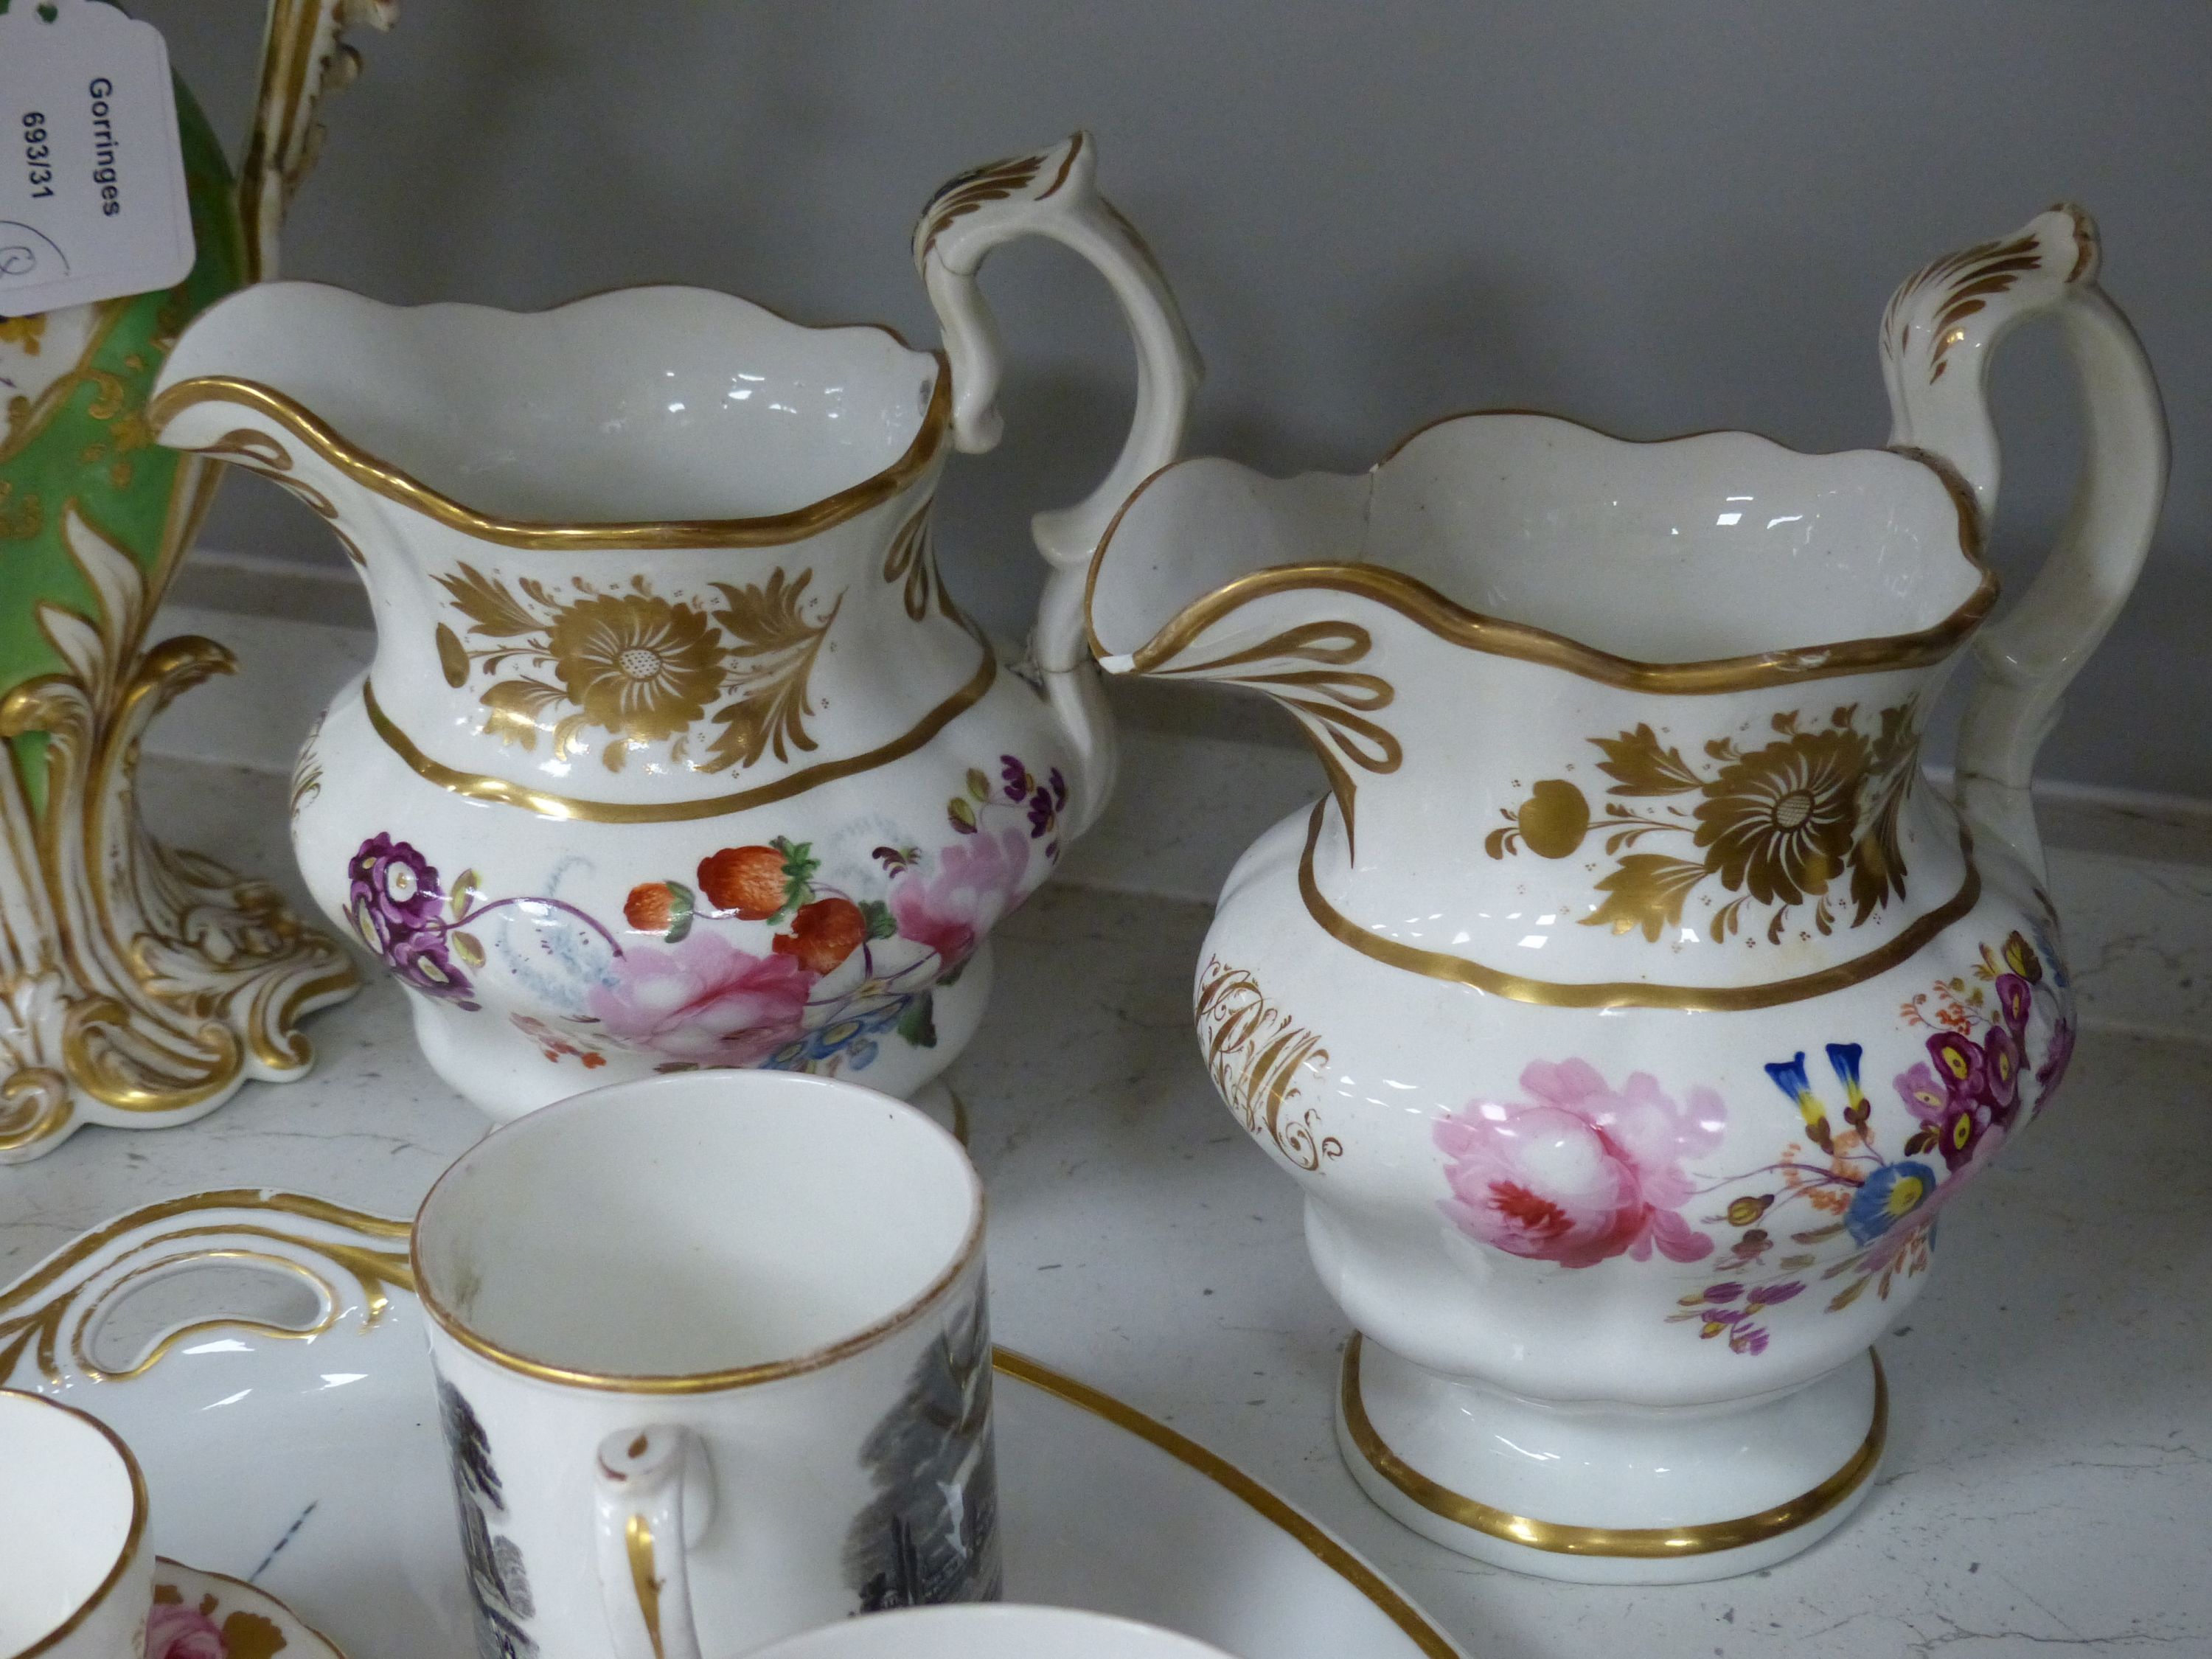 A Continental porcelain two handled tray painted with flowers and gilded with initials, a large English vase, a pair of Delft of vases, two Foley cup and saucers, two English jugs and other items